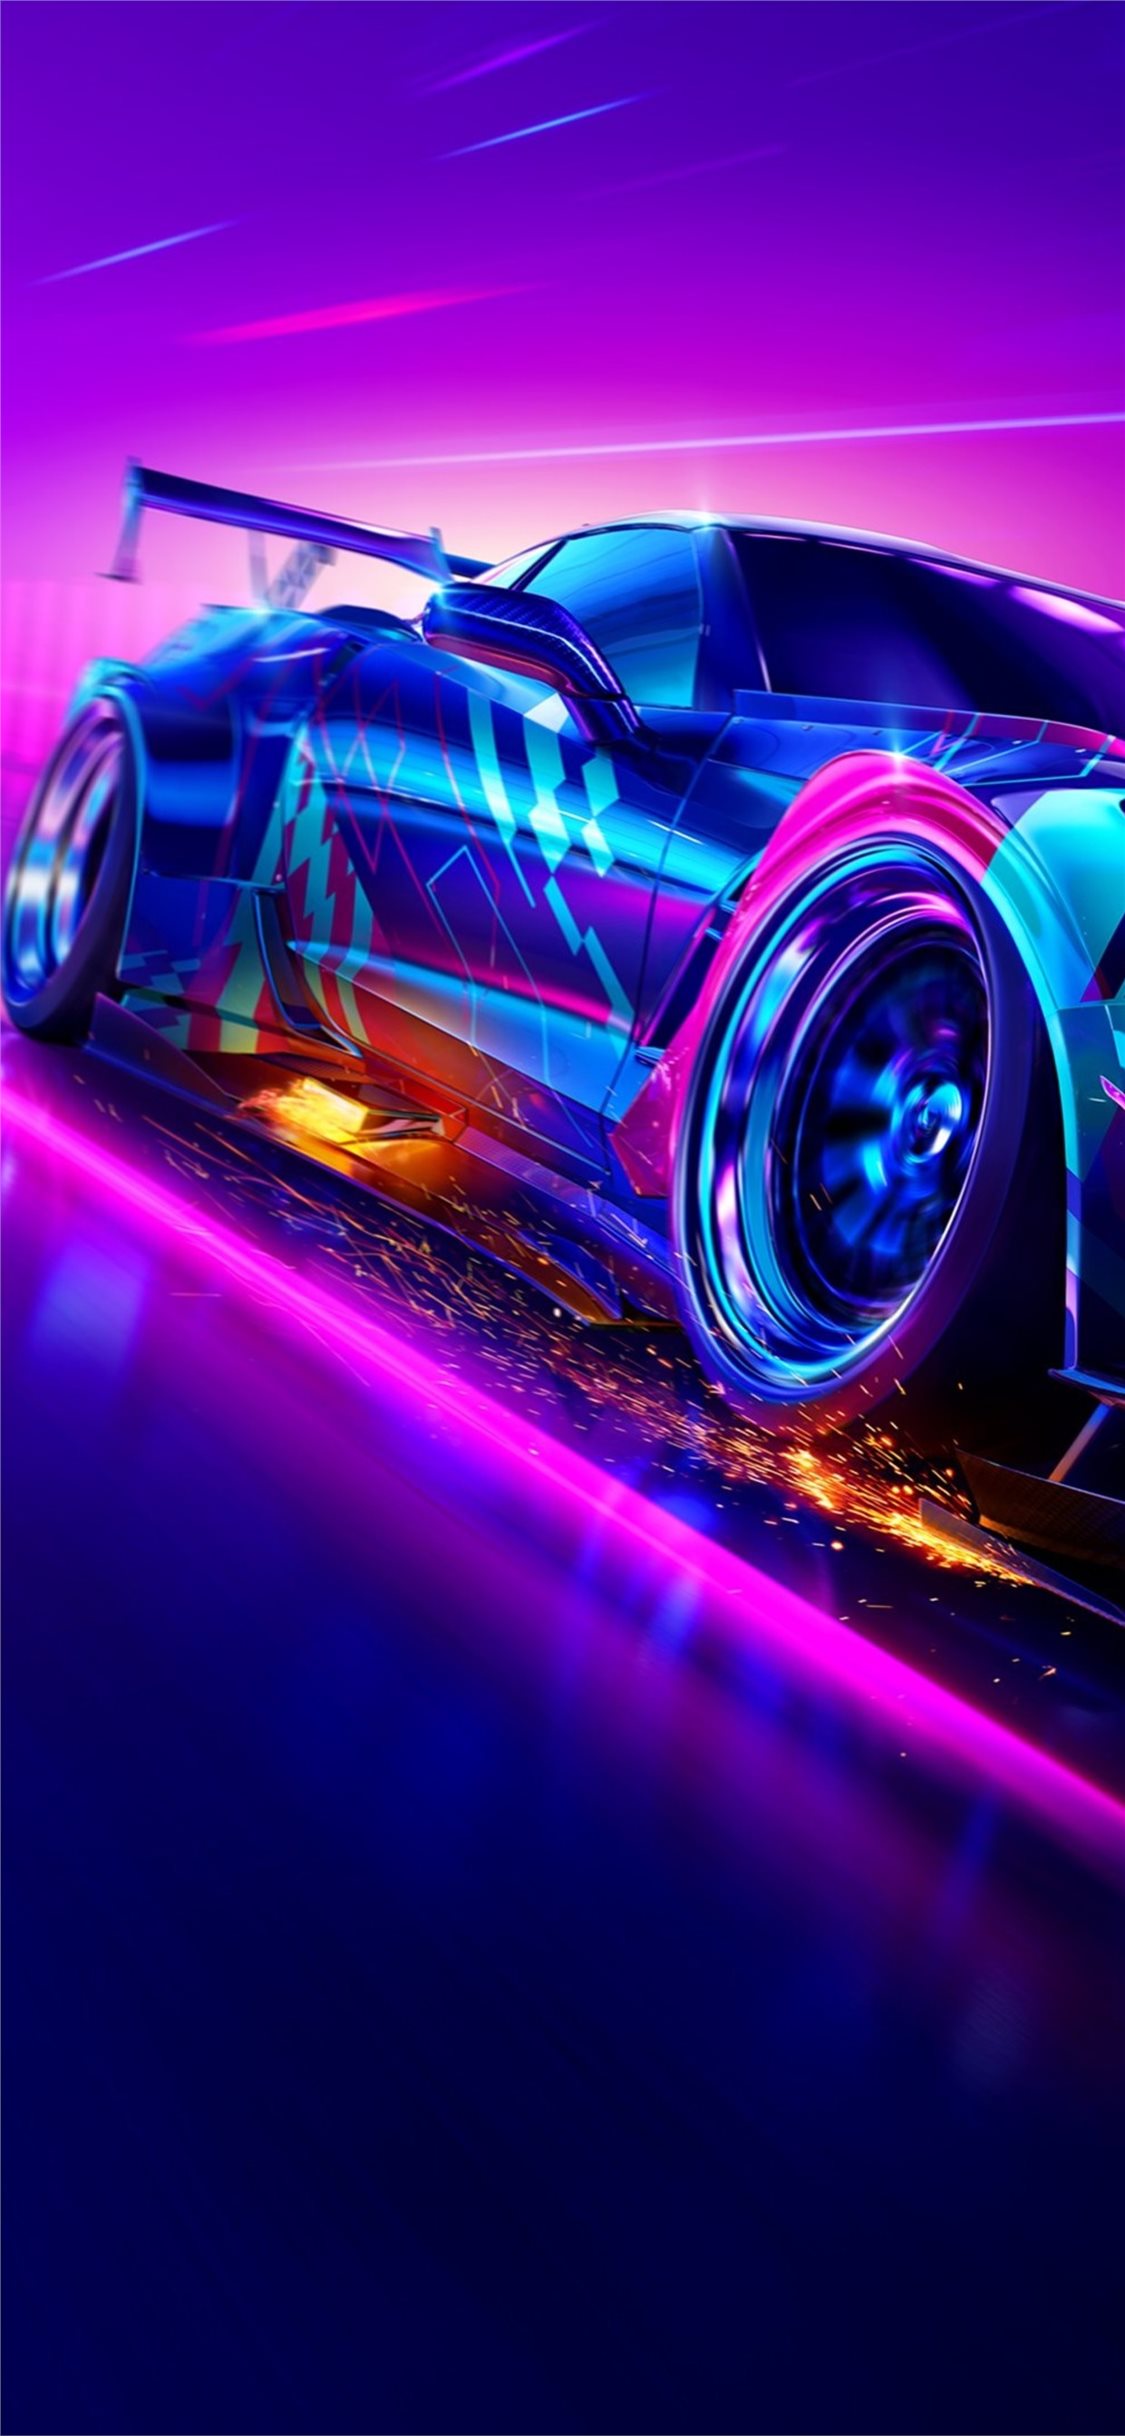 need for speed iphone wallpaper,vehicle,car,purple,automotive design,electric blue